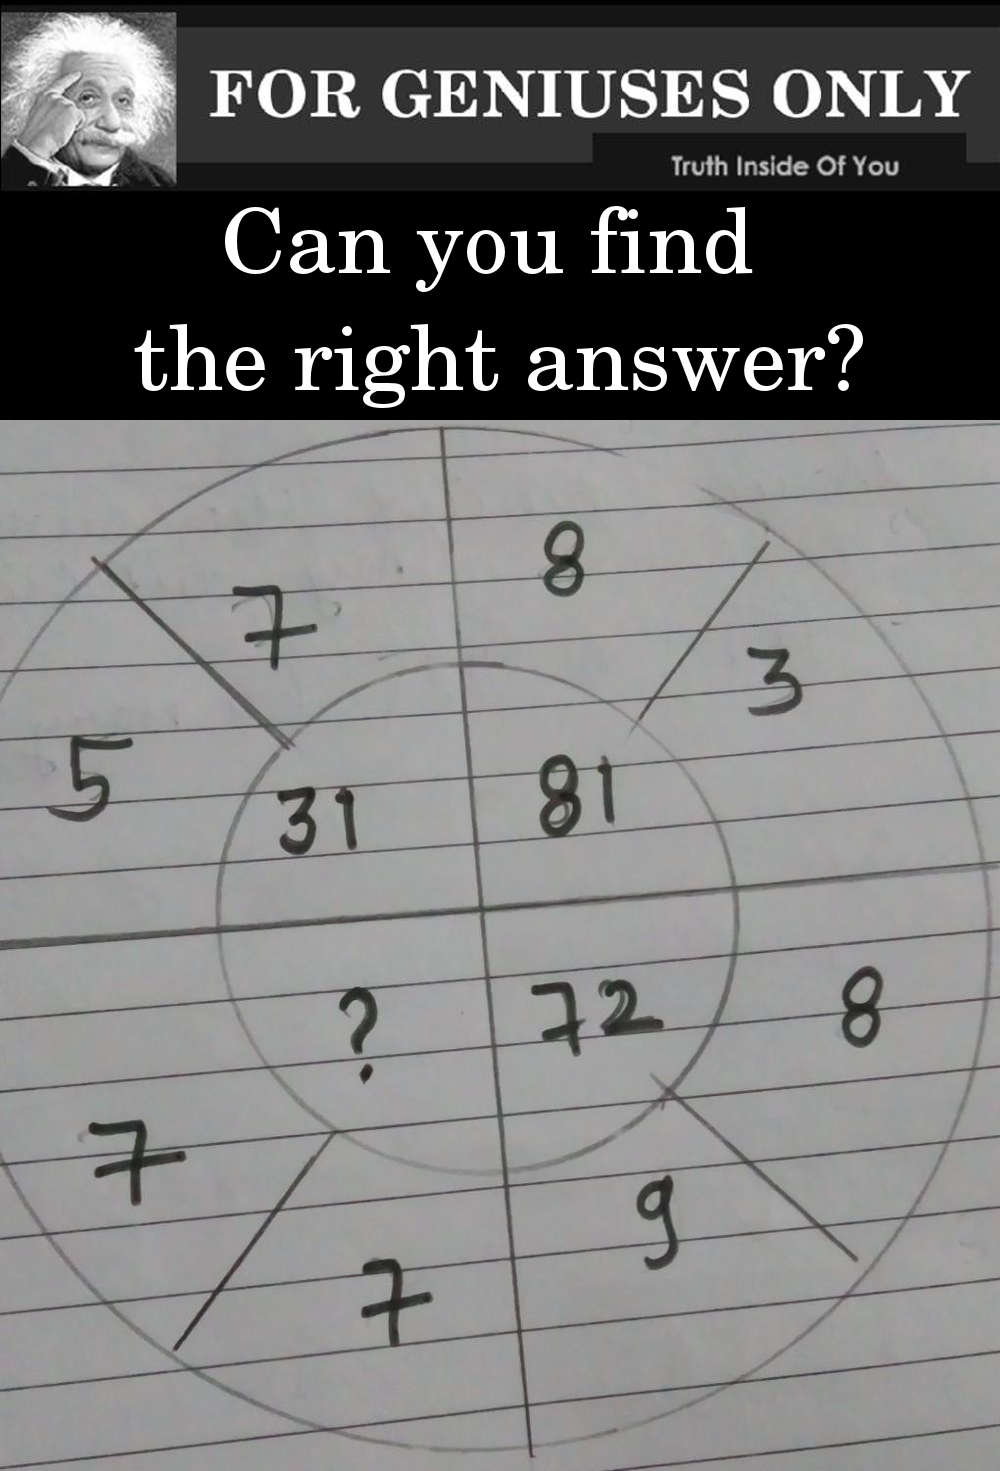 can you find the right question?